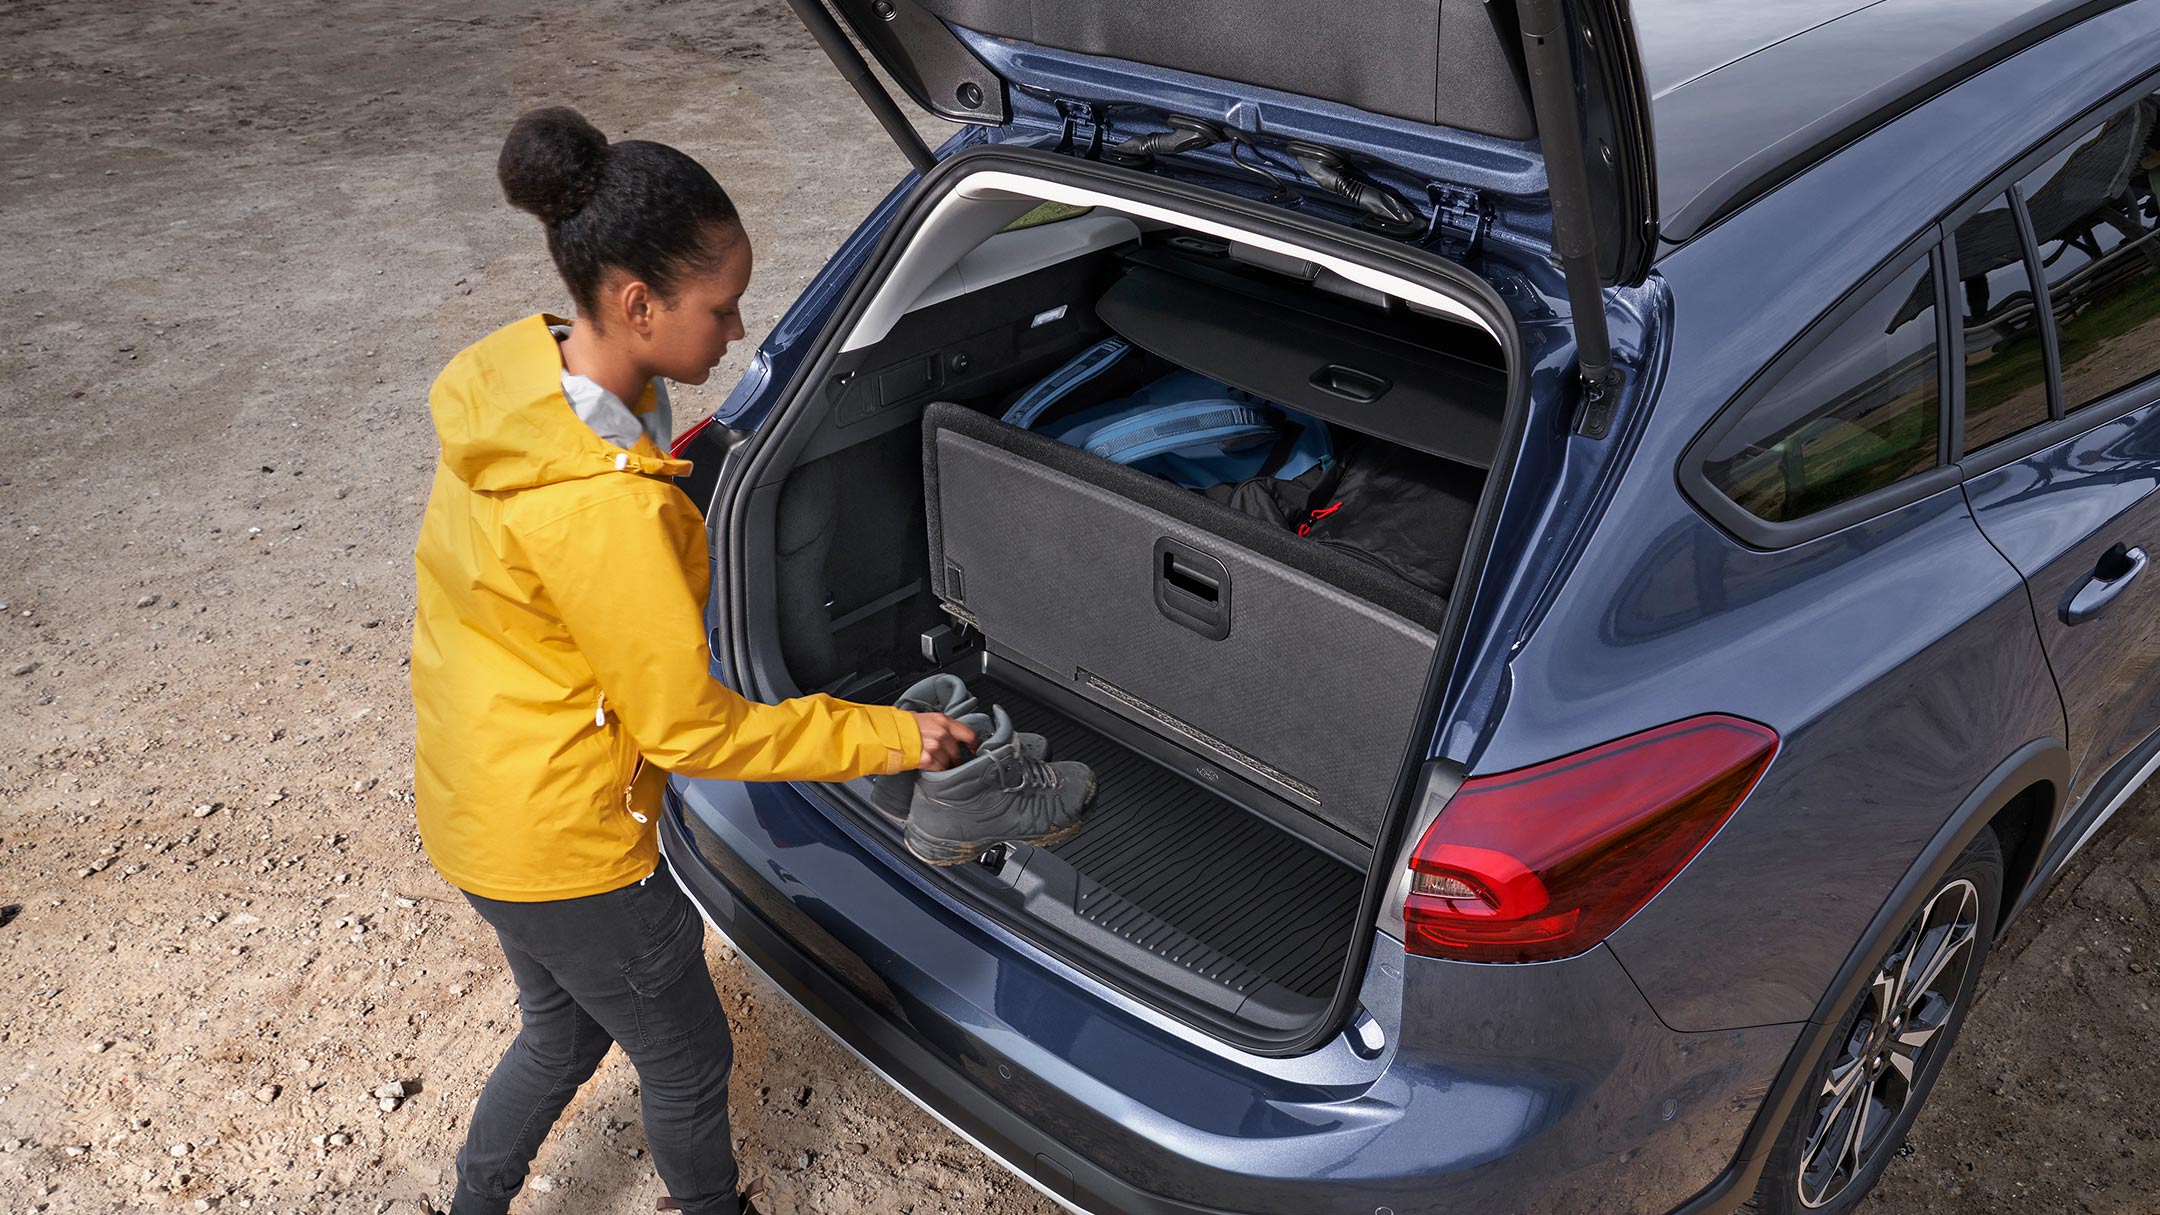 Ford Focus trunk showing wet compartment